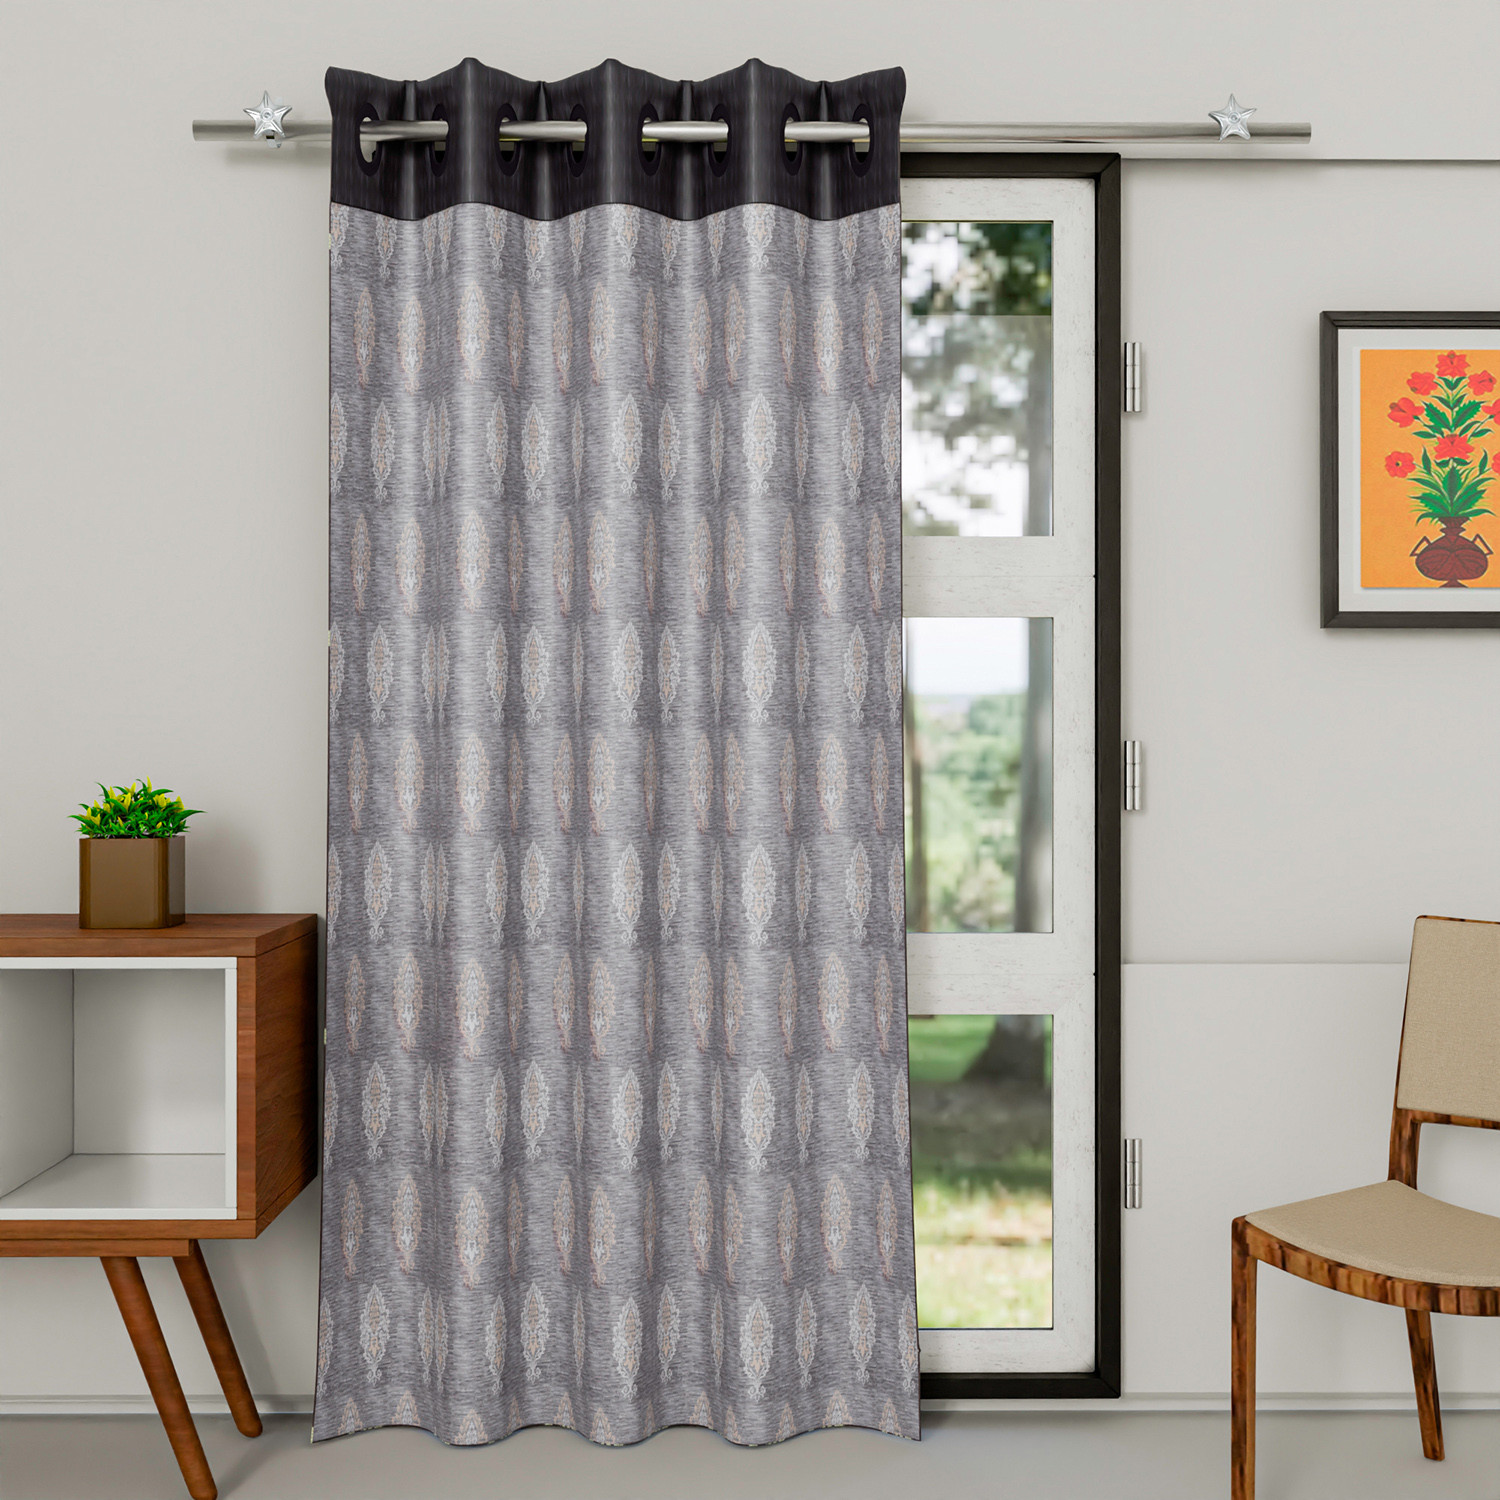 Kuber Industries Faux Silk Decorative 7 Feet Door Curtain | Damask Print Blackout Drapes Curtain With 8 Eyelet For Home & Office (Gray)